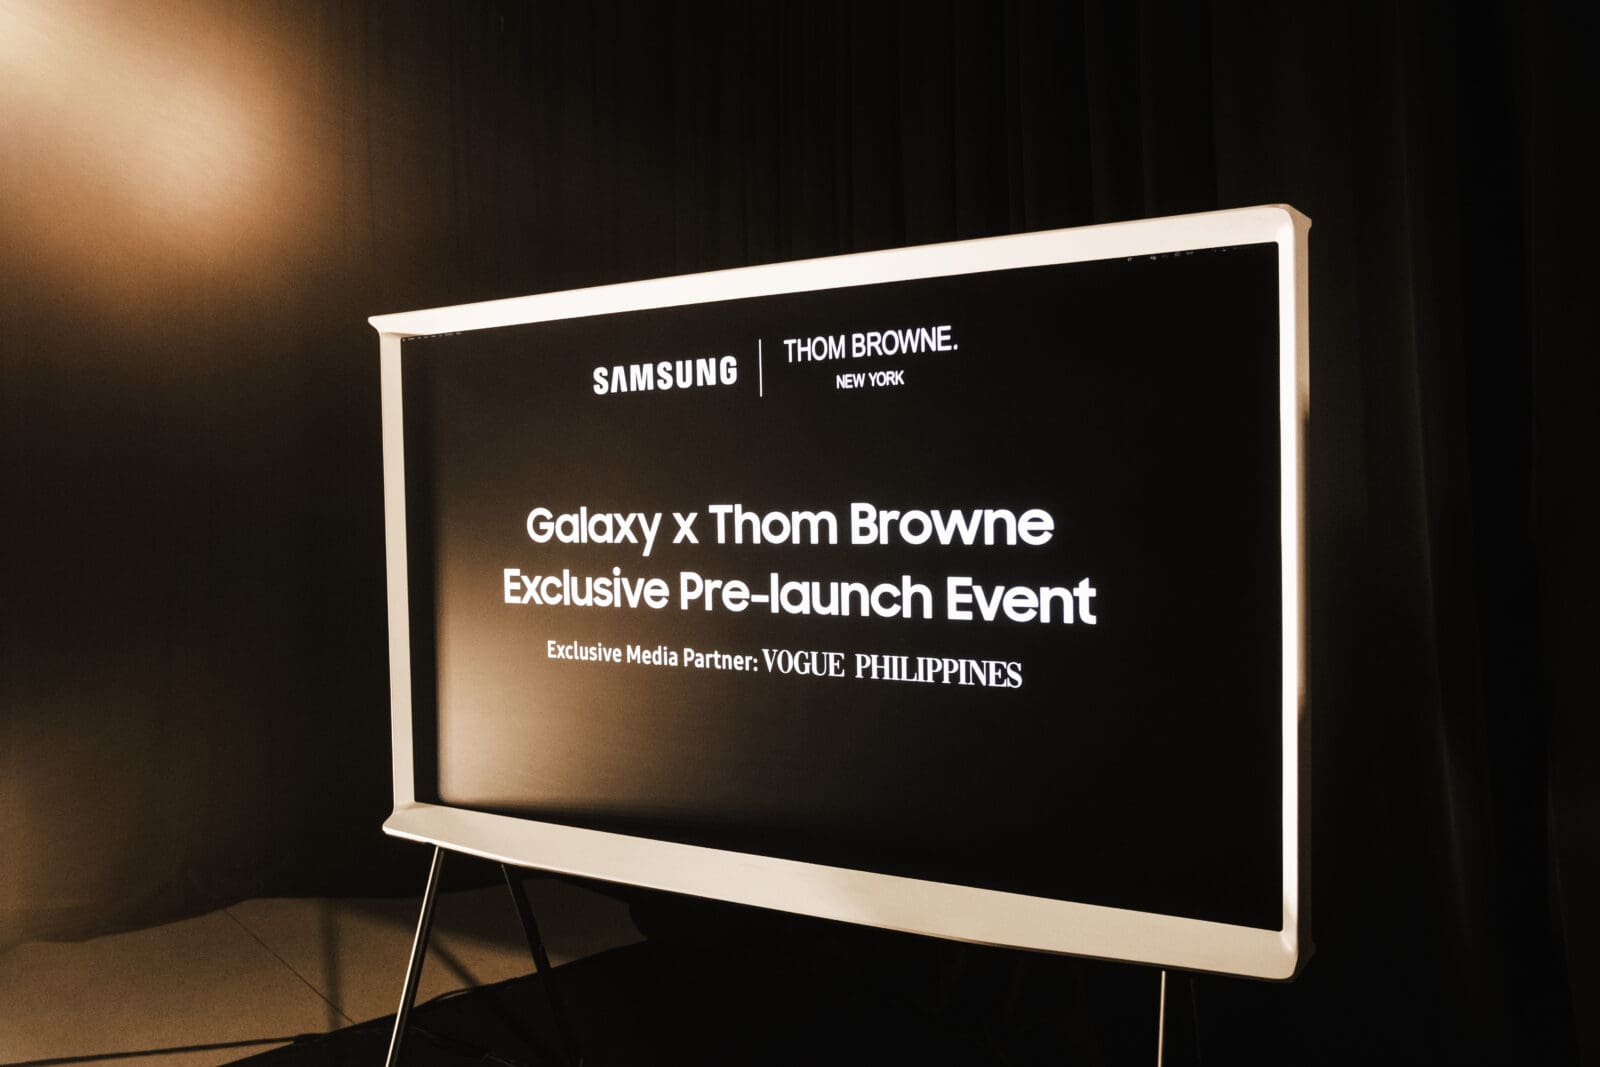 The Galaxy x Thom Browne Pre-launch event